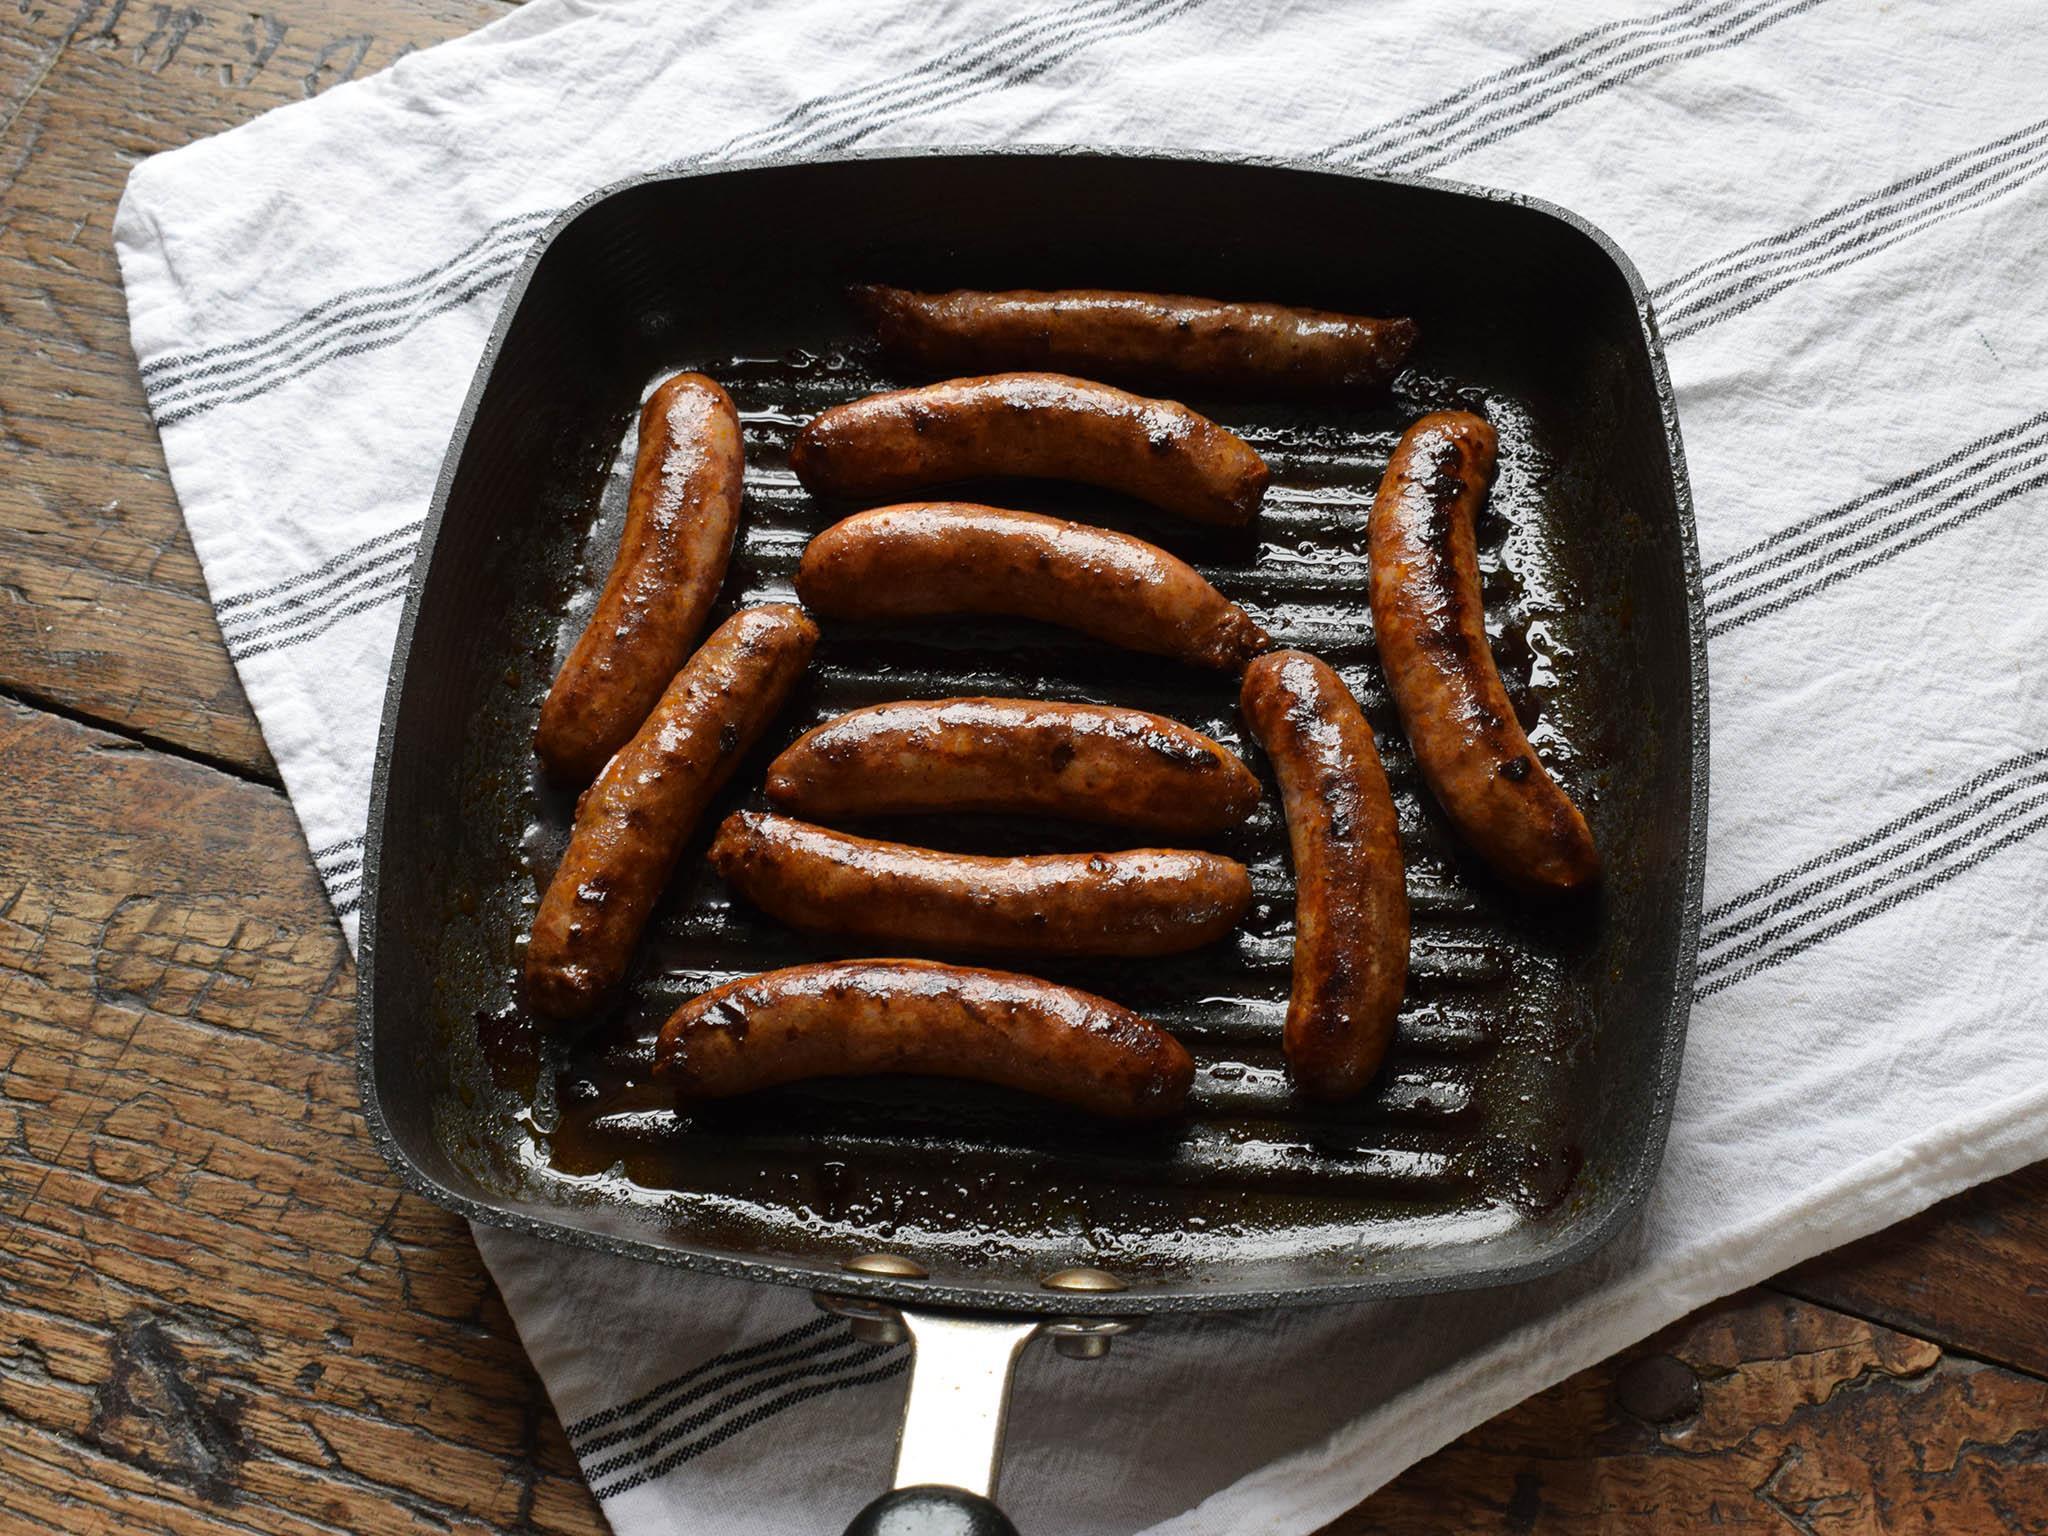 Merguez sausages will soon be readily available to buy at Bere Marsh Farm